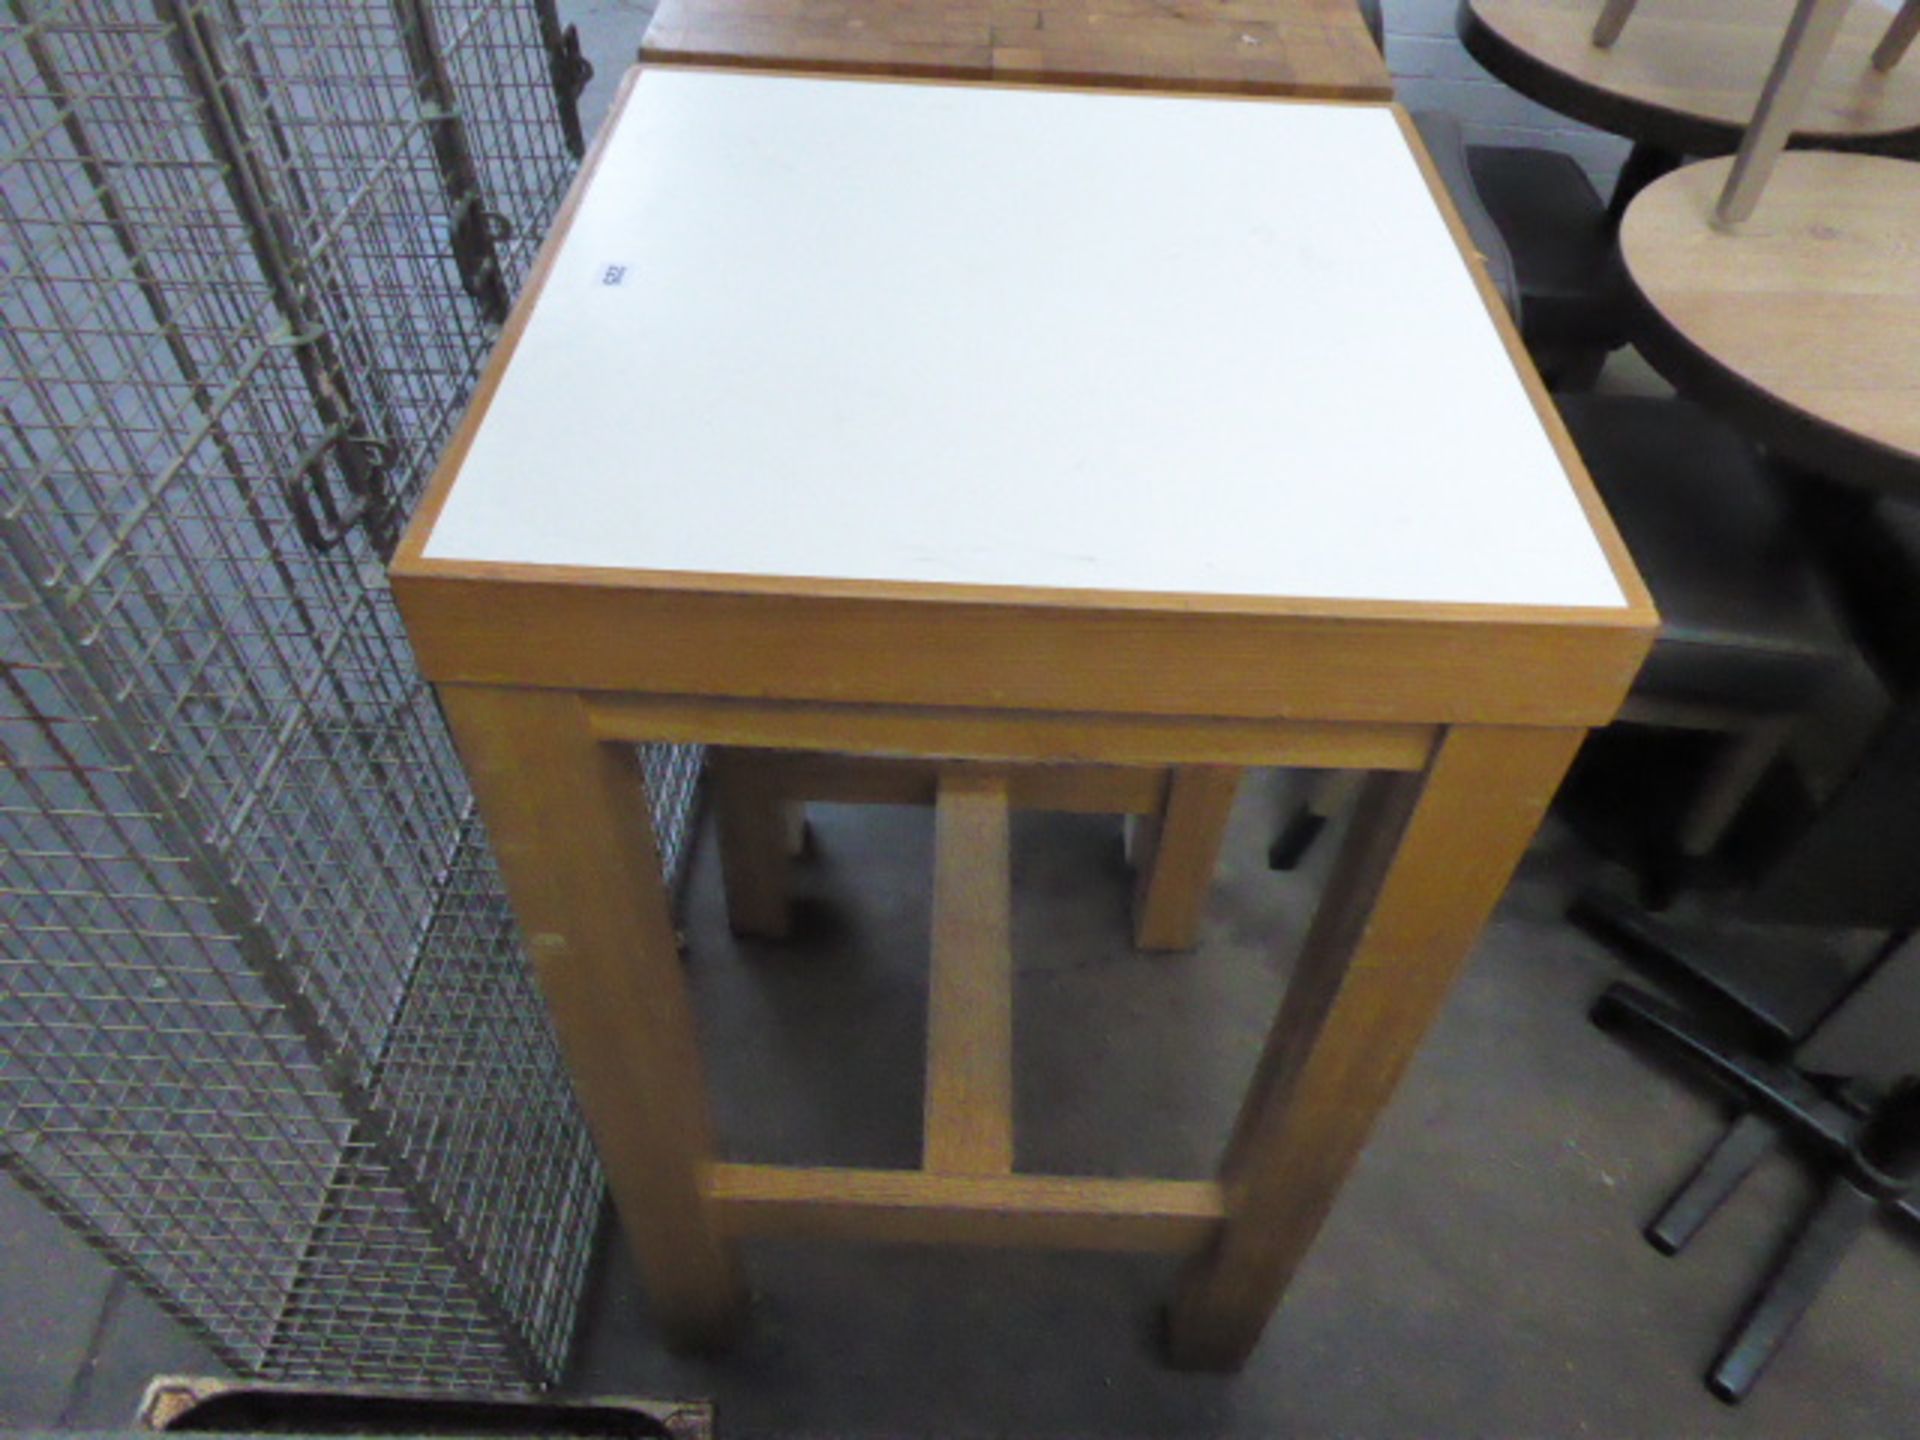 60cm square solid oak poser height table with white top